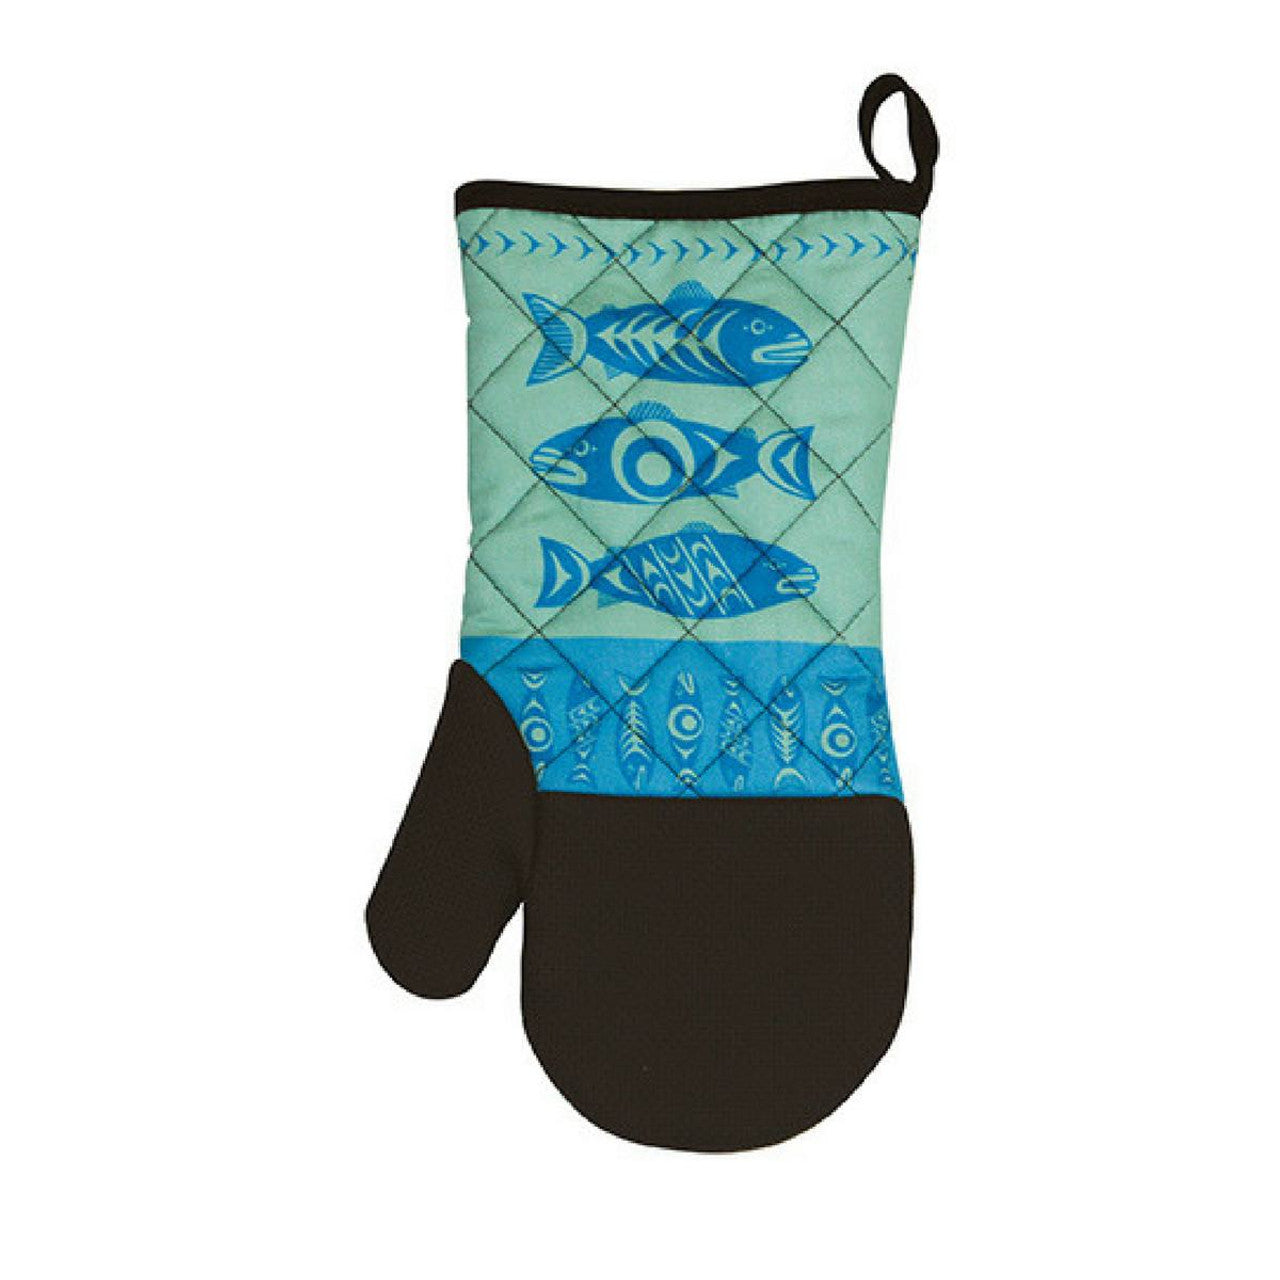 OVEN MITTS - Salmon in the Wild - KODS - House of Himwitsa Native Art Gallery and Gifts